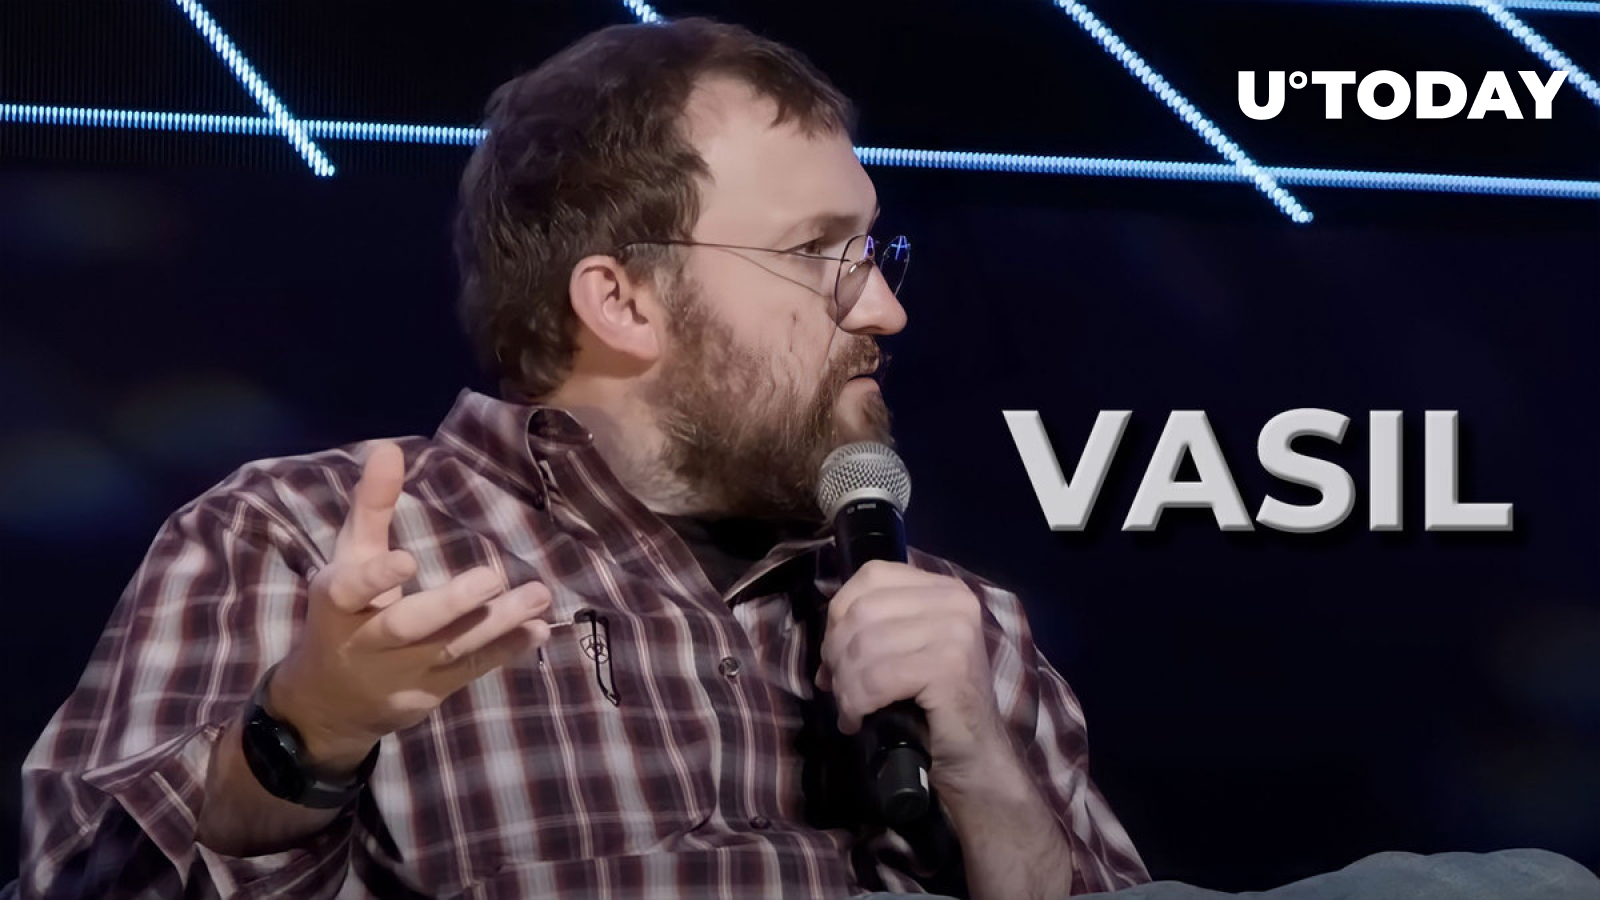 Charles Hoskinson: Here’s What Effect Cardano’s Vasil Upgrade Has Now